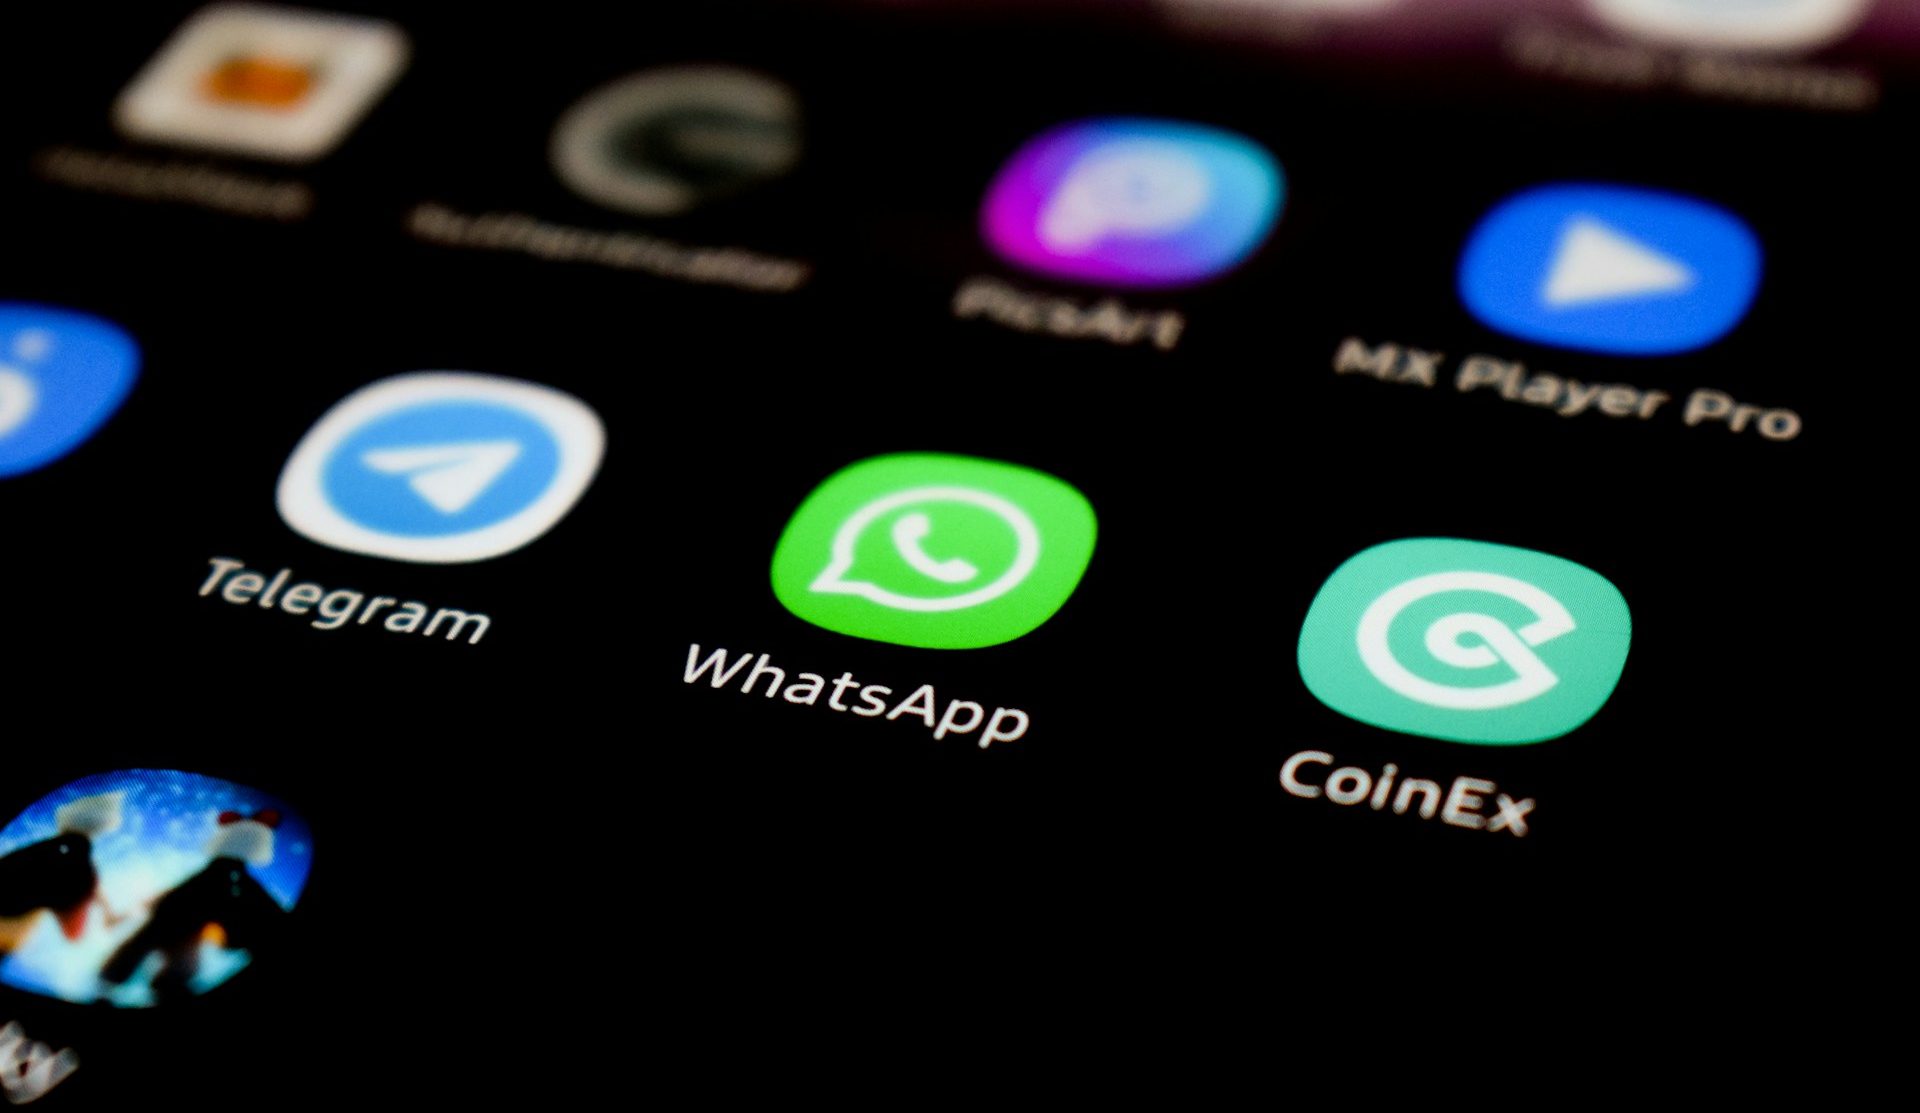 WhatsApp Rolls Out Passkeys Support for iOS